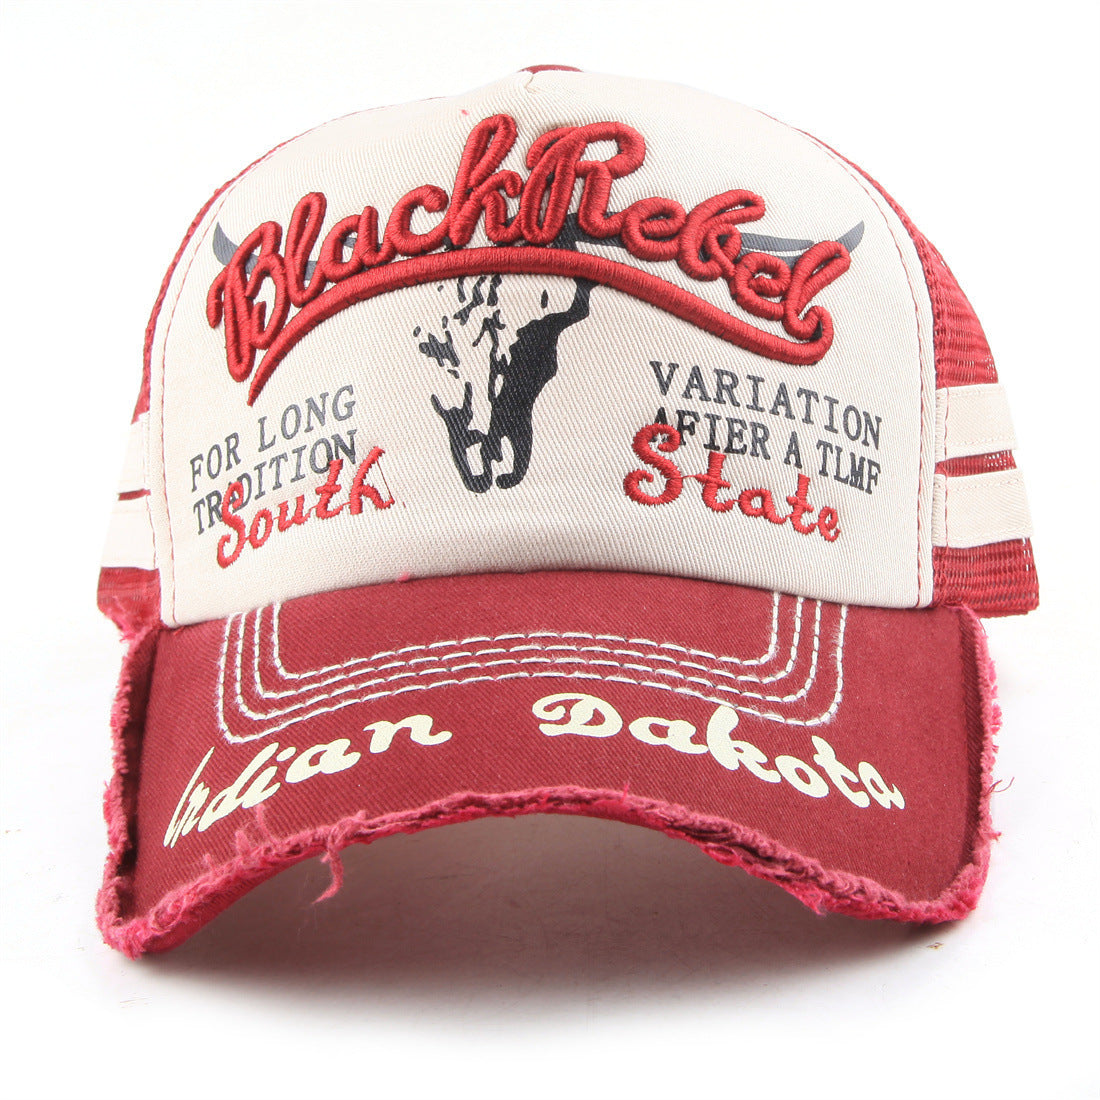 Women's Summer Washed Bull Head Embroidered Baseball Cap